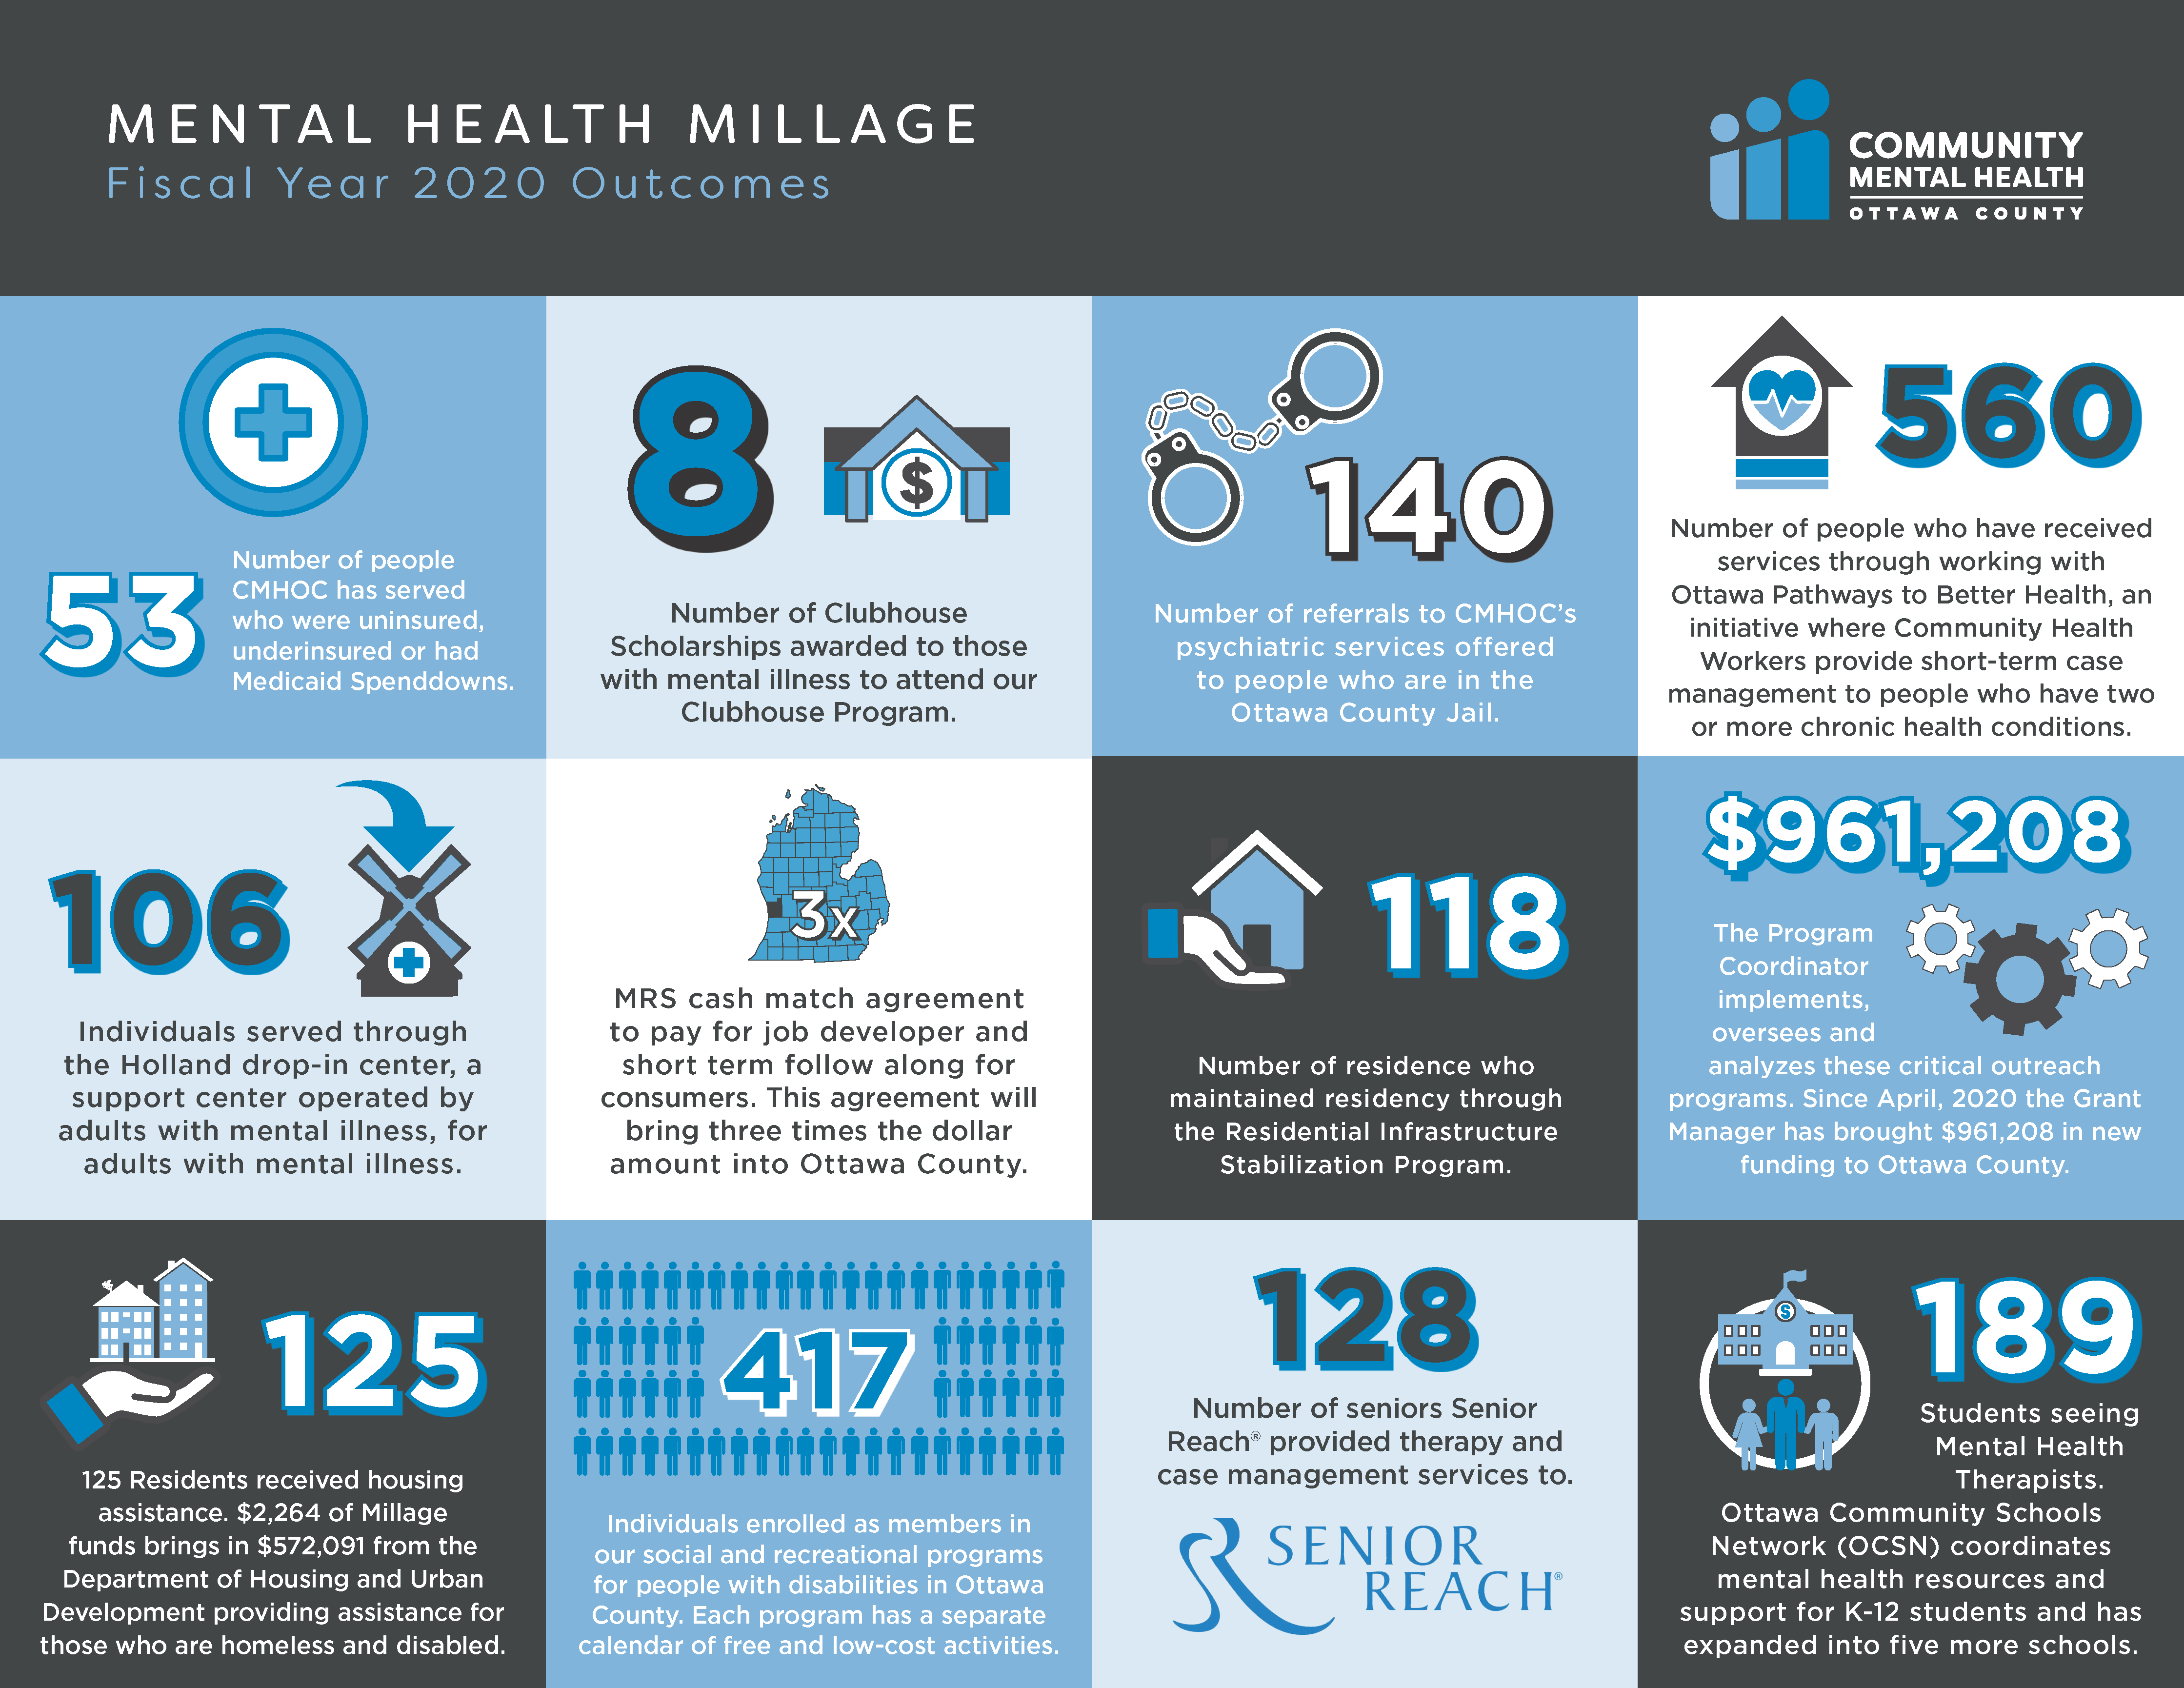 Mental Health Millage Fiscal Year 2020 Outcome Infographic